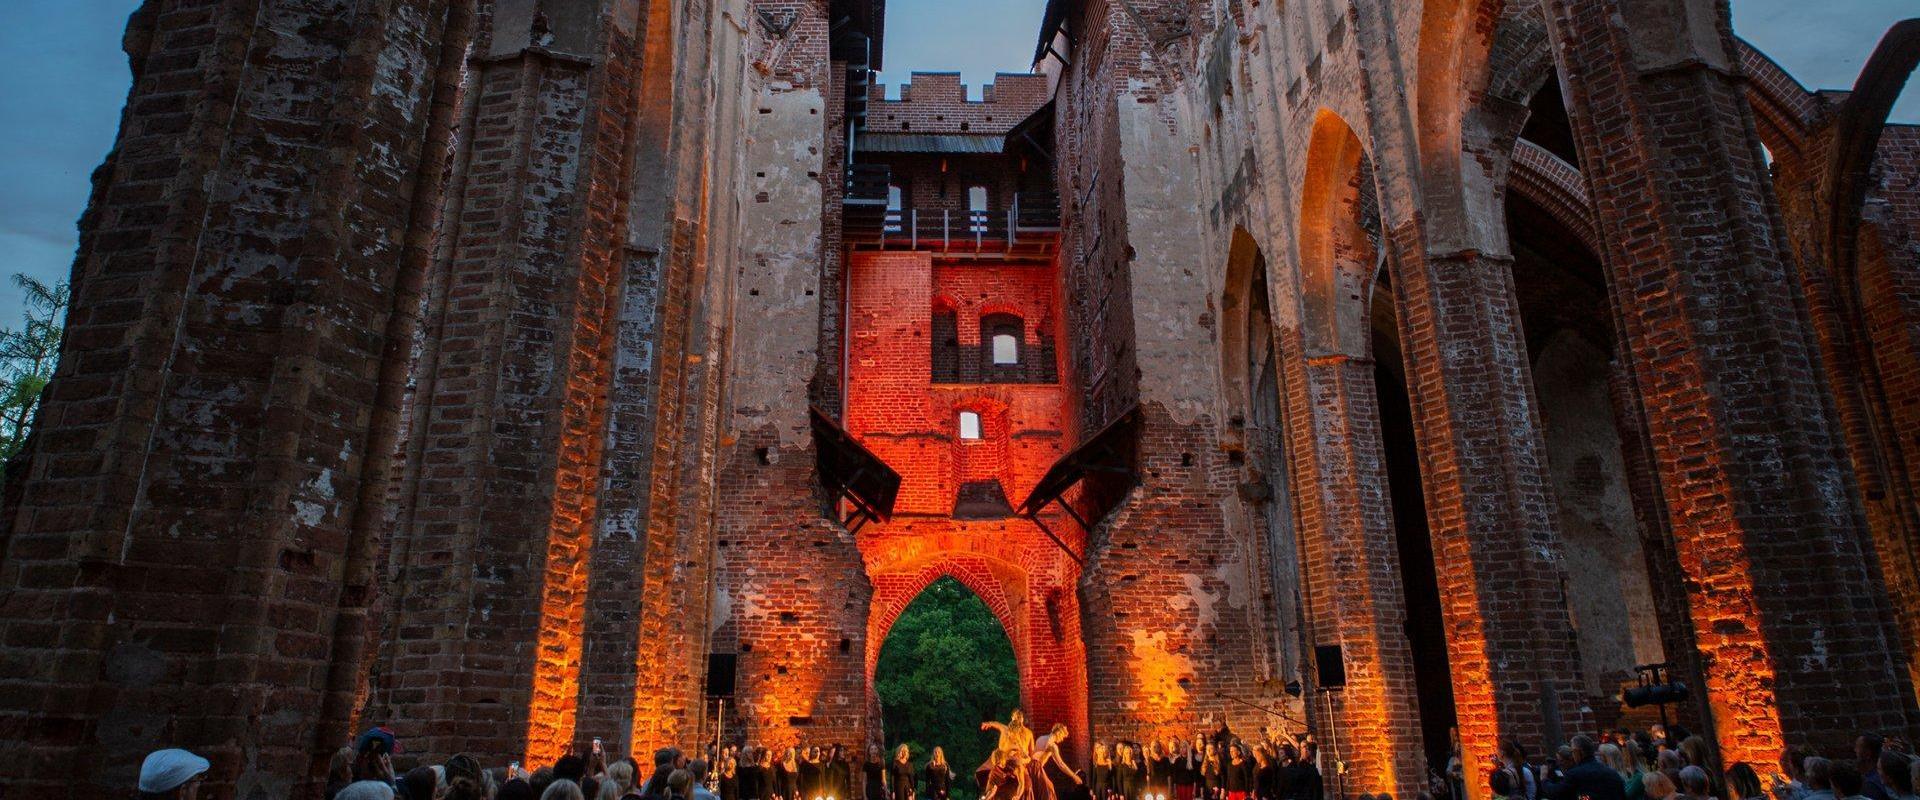 Virtual tour of the city of Tartu: the ruins of the Cathedral of the University of Tartu, dance performance